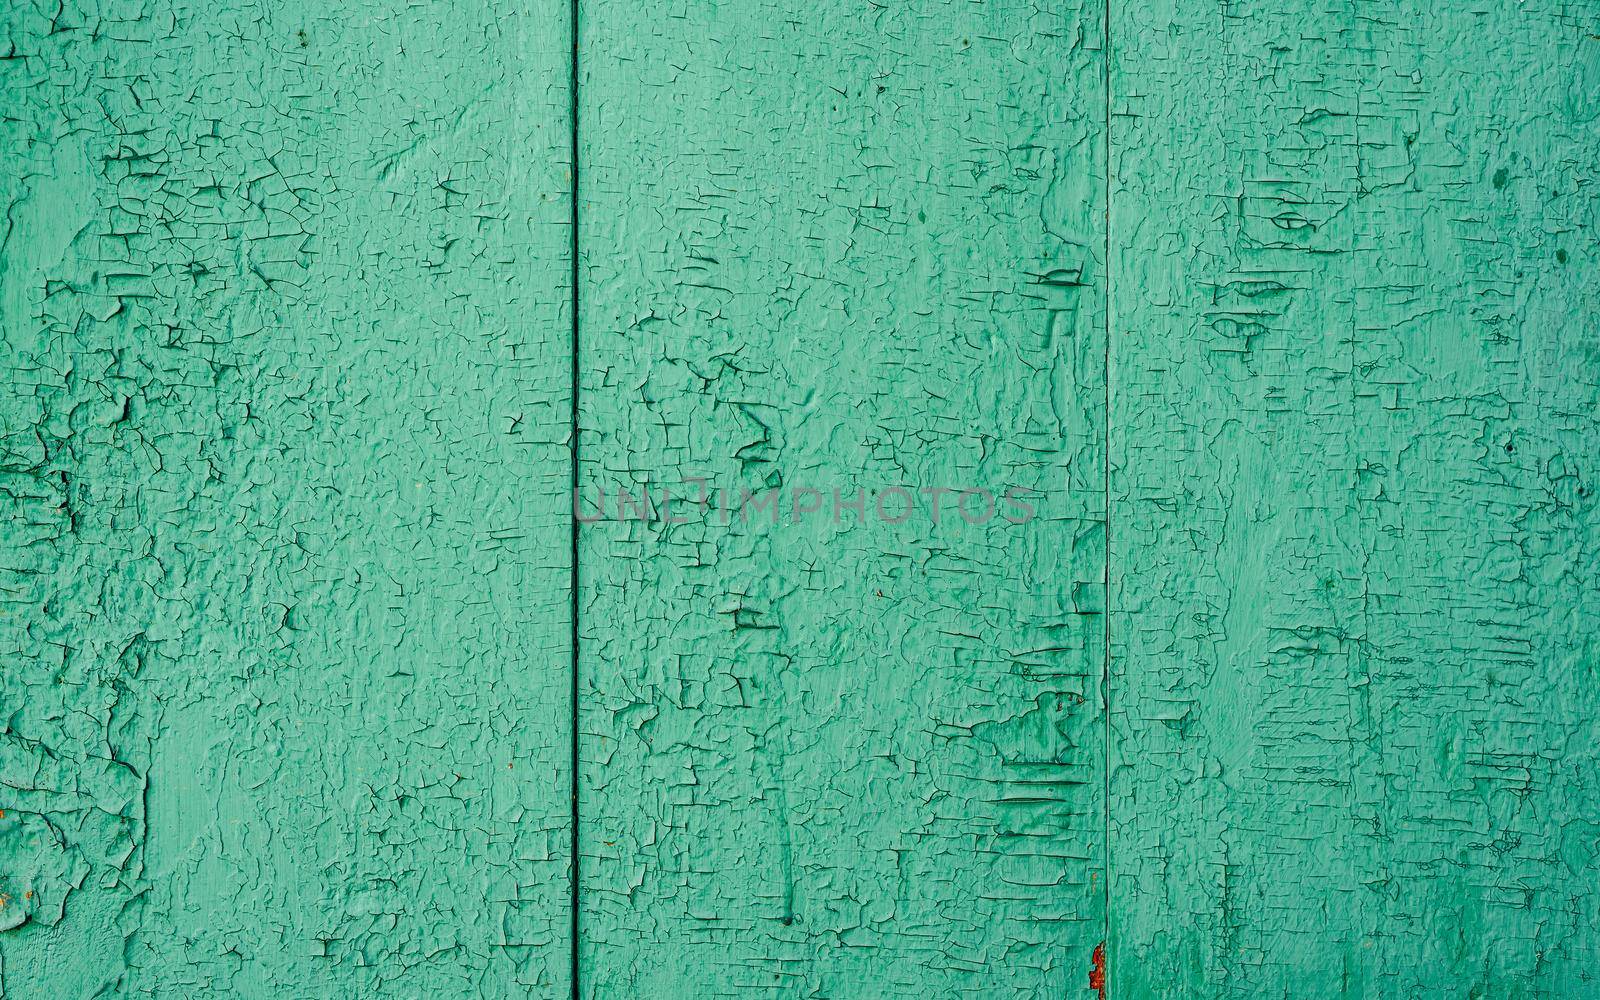 Background of green wooden surface by Seva_blsv